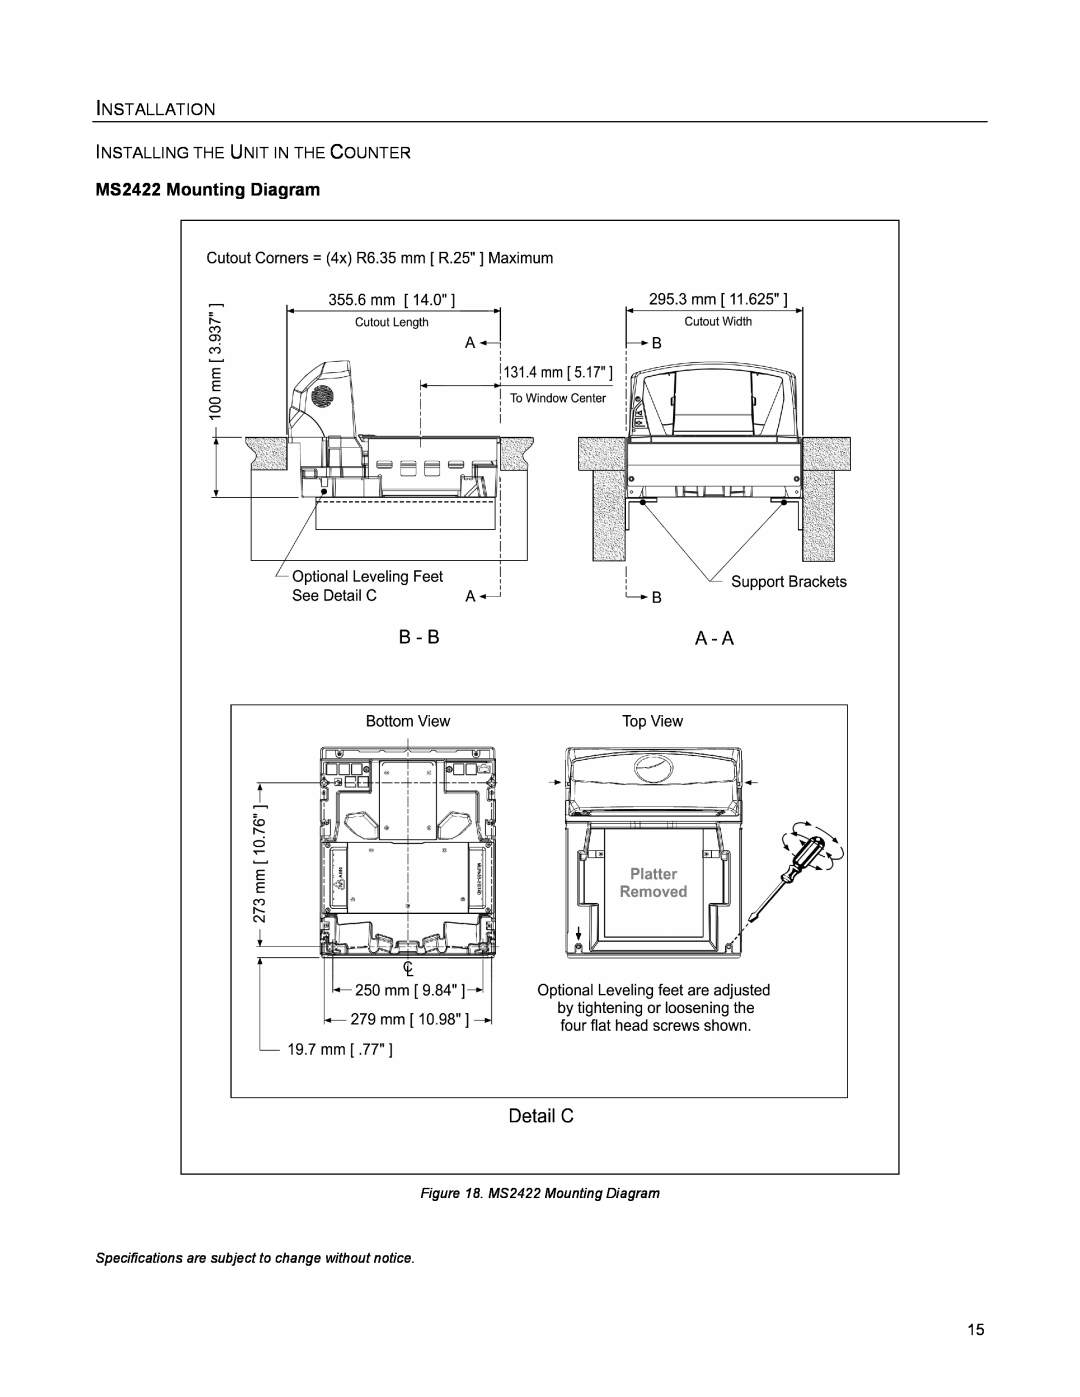 Metrologic Instruments MS2421 MS2422 Mounting Diagram, Installation, Specifications are subject to change without notice 